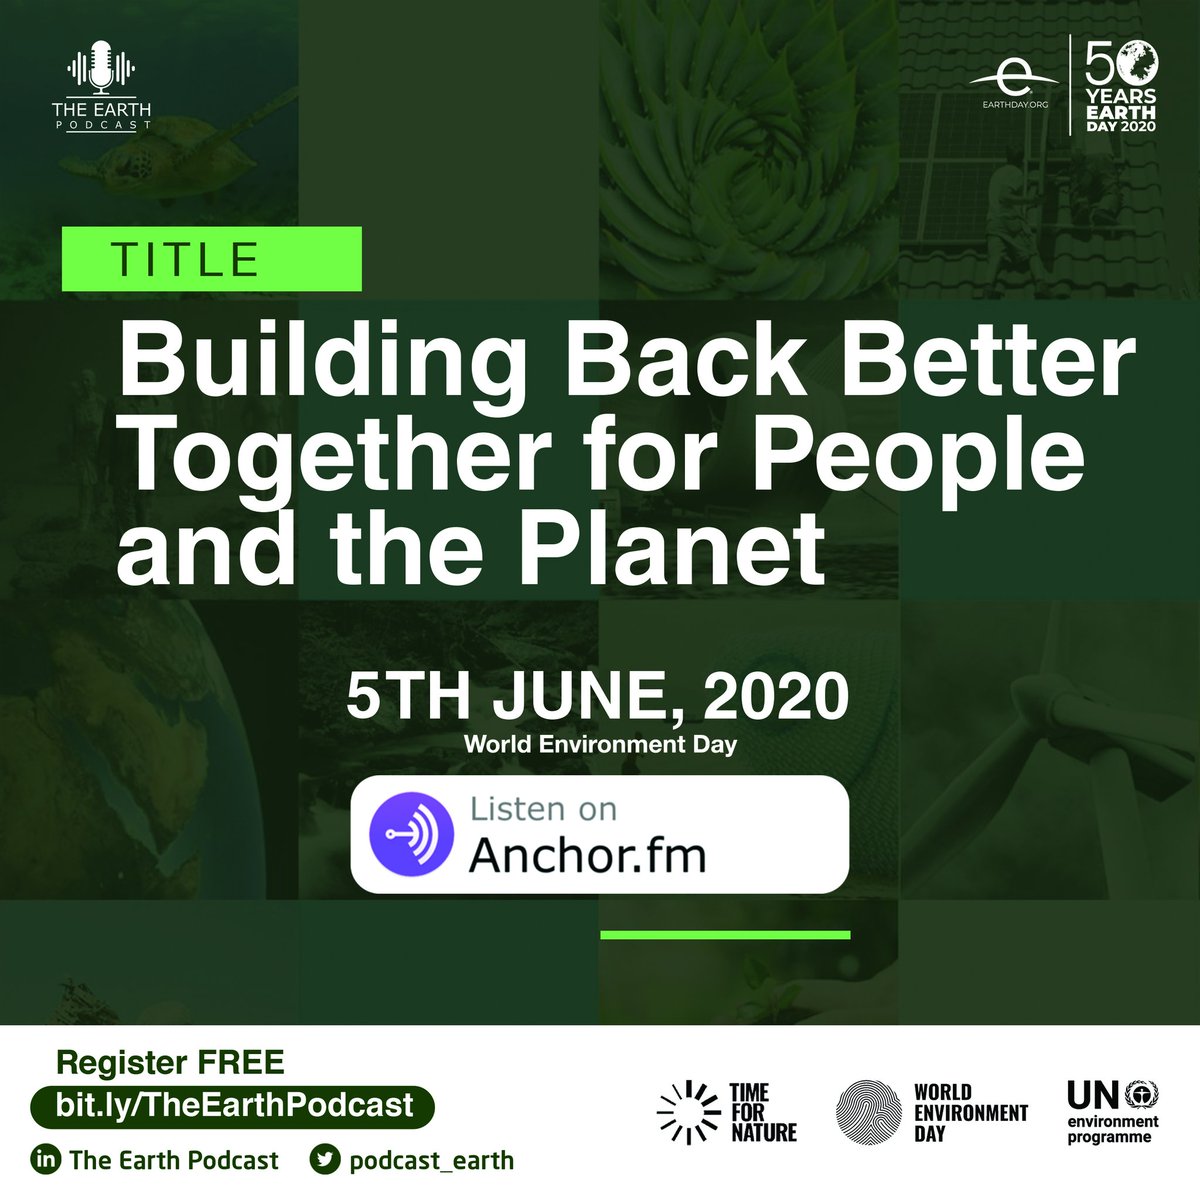 Join us as we mark #WorldEnvironmentDay with a new #podcast episode featuring speakers from @EarthDayNetwork & @UNEP. 🗓 5th June 2020 🌐 Register: bit.ly/TheEarthPodcast It is Time #ForNature. #Biodiversity #WorldEnvironmentDay2020 #TheEarthPodcast #EarthDay #BuildBackBetter